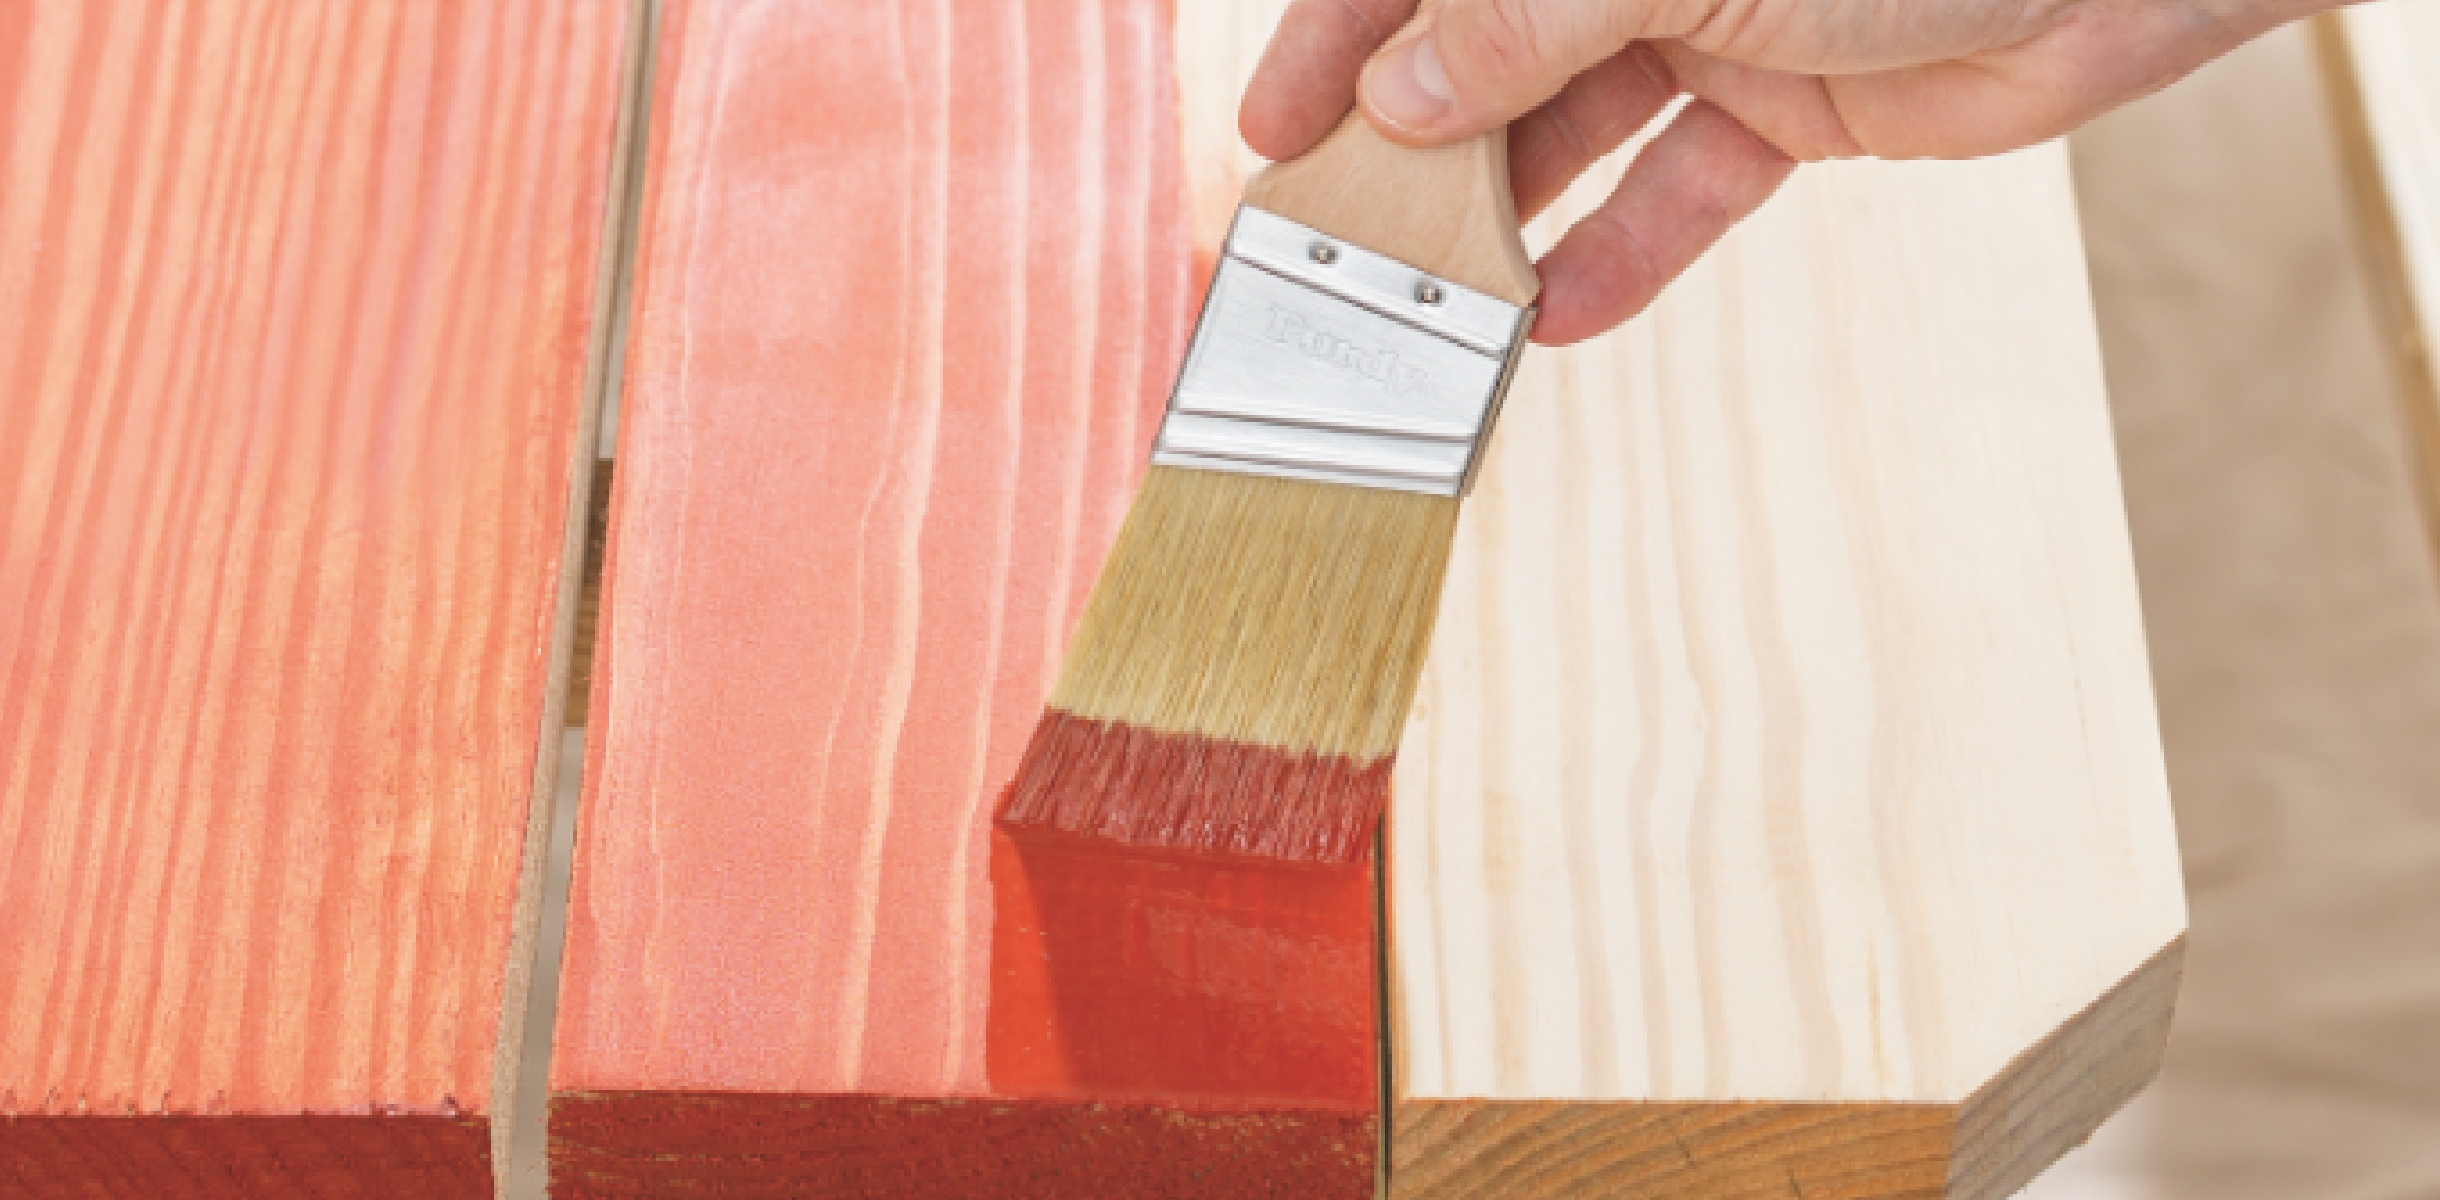 Painting a wood deck with a vibrant red stain using a natural bristle brush.